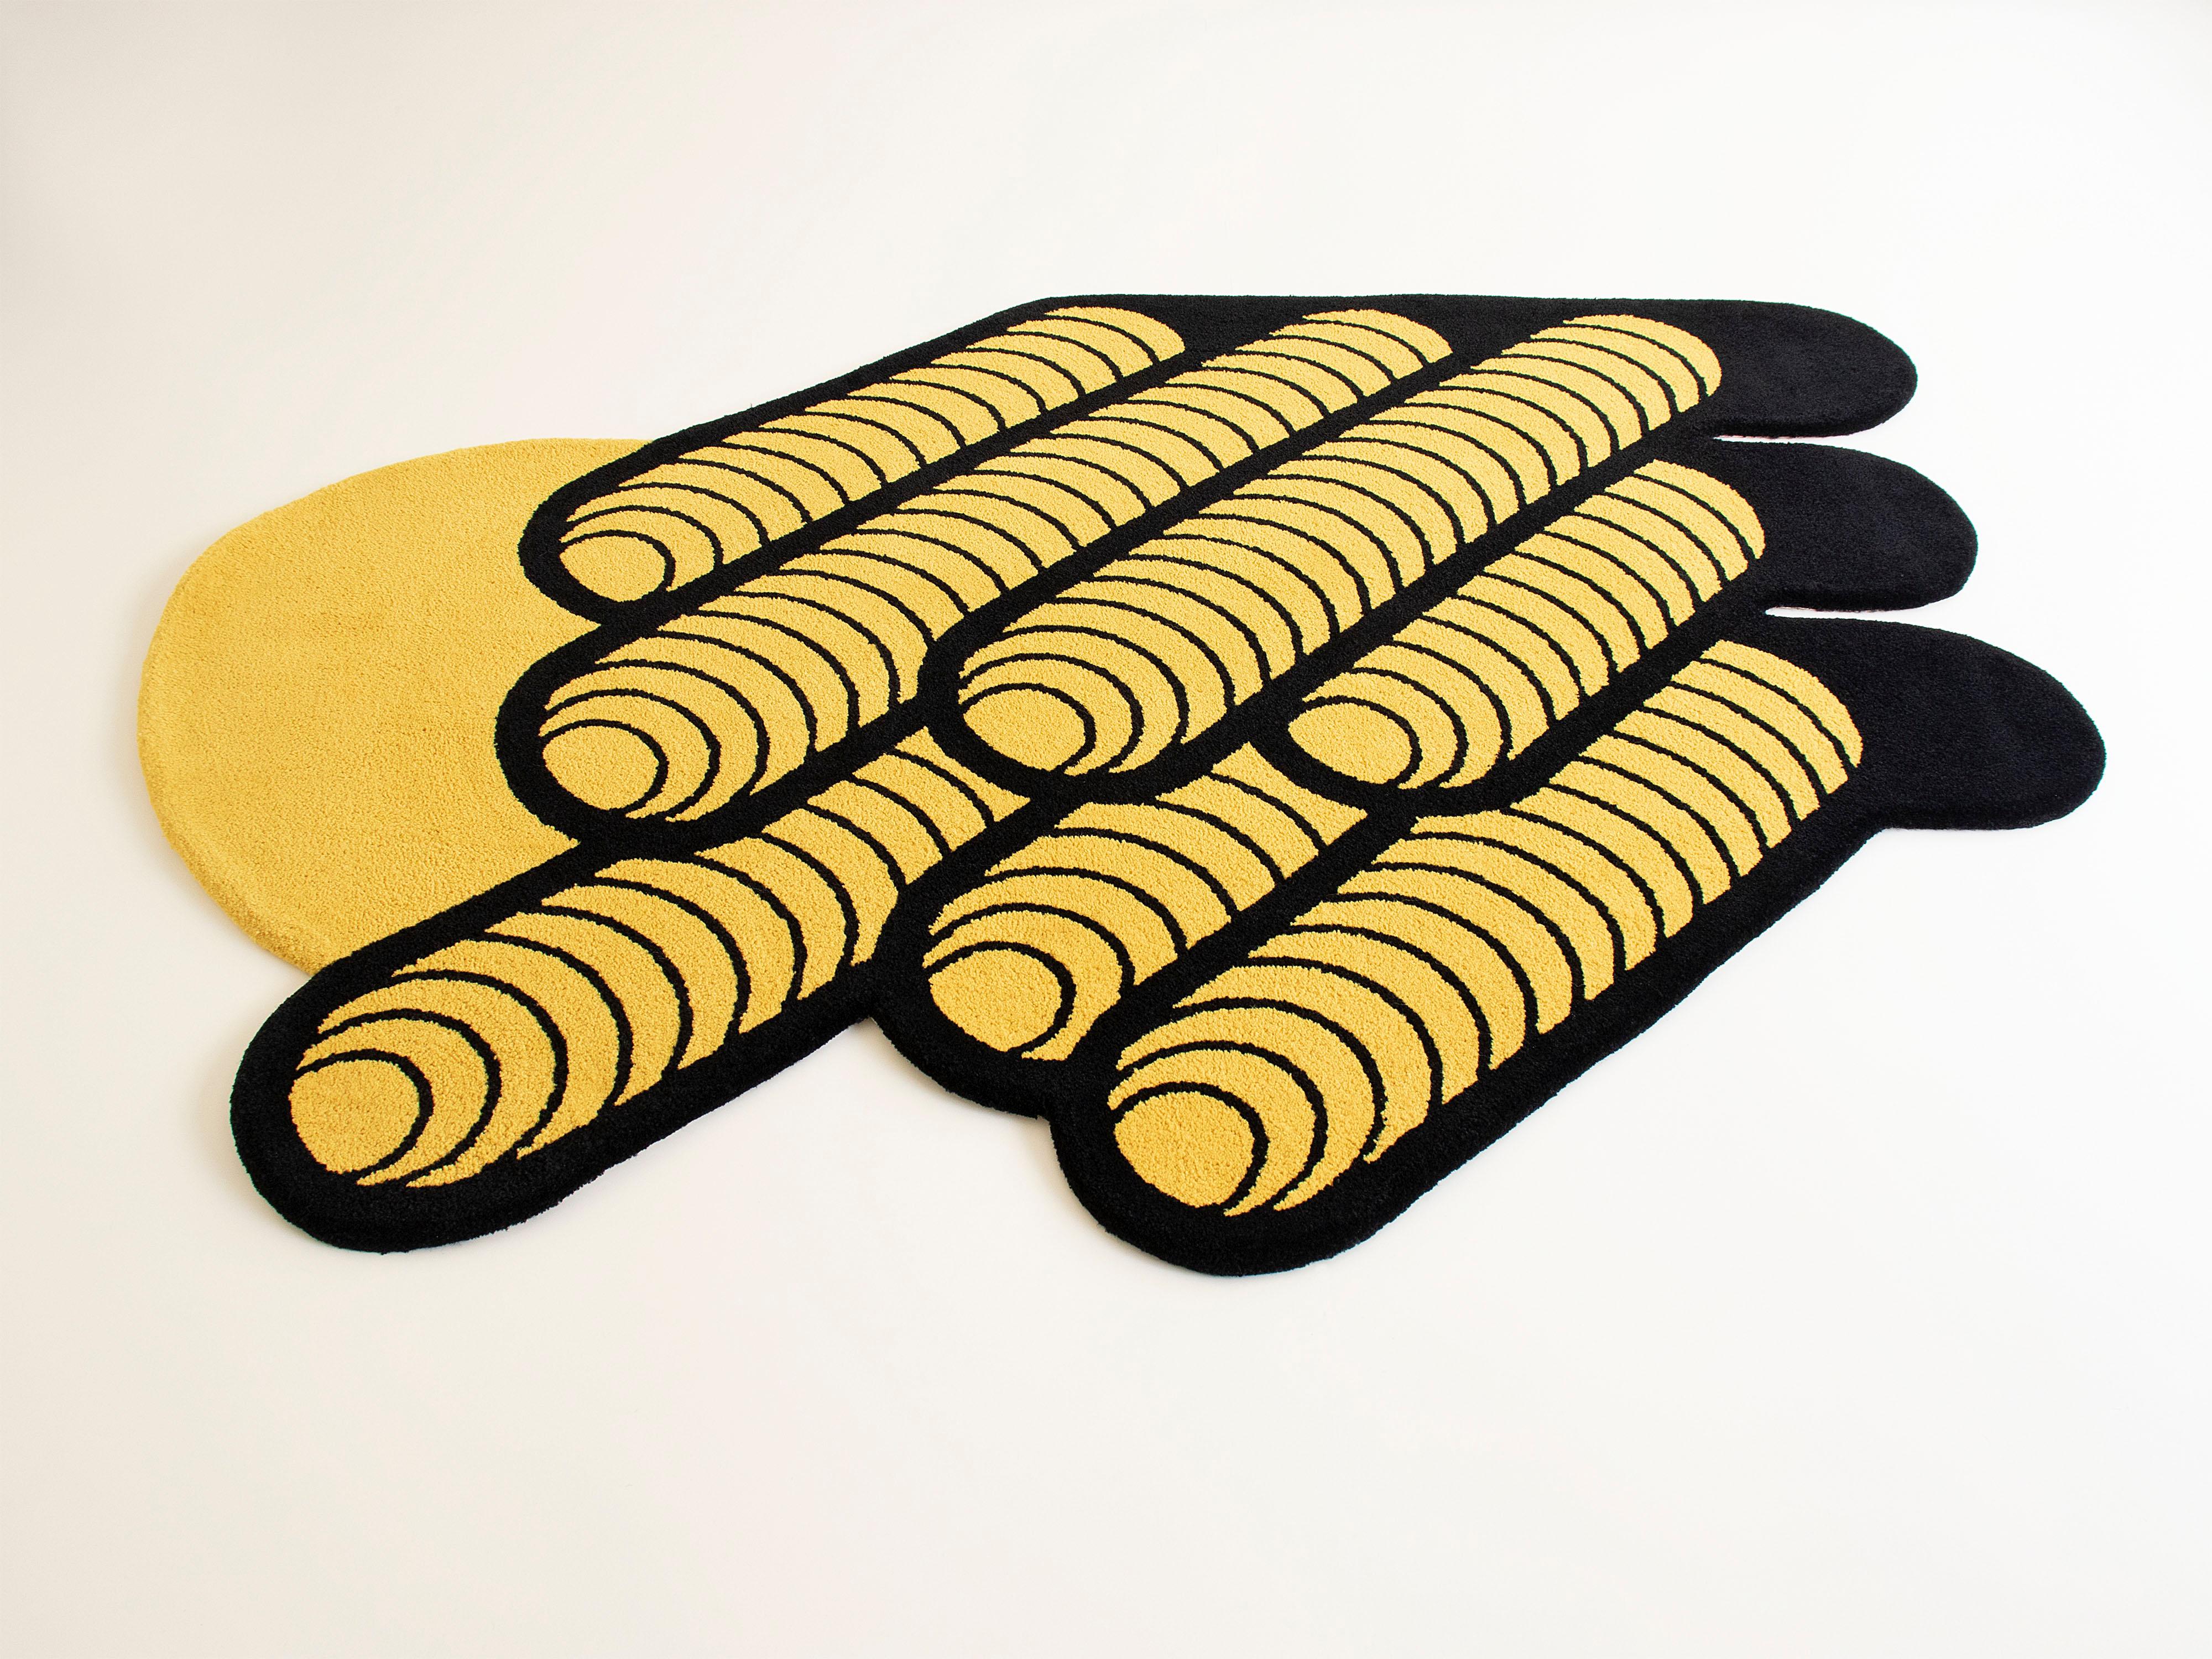 Yellow & Black Buildings Rug from Graffiti Collection by Paulo Kobylka In Good Condition For Sale In Londrina, Paraná